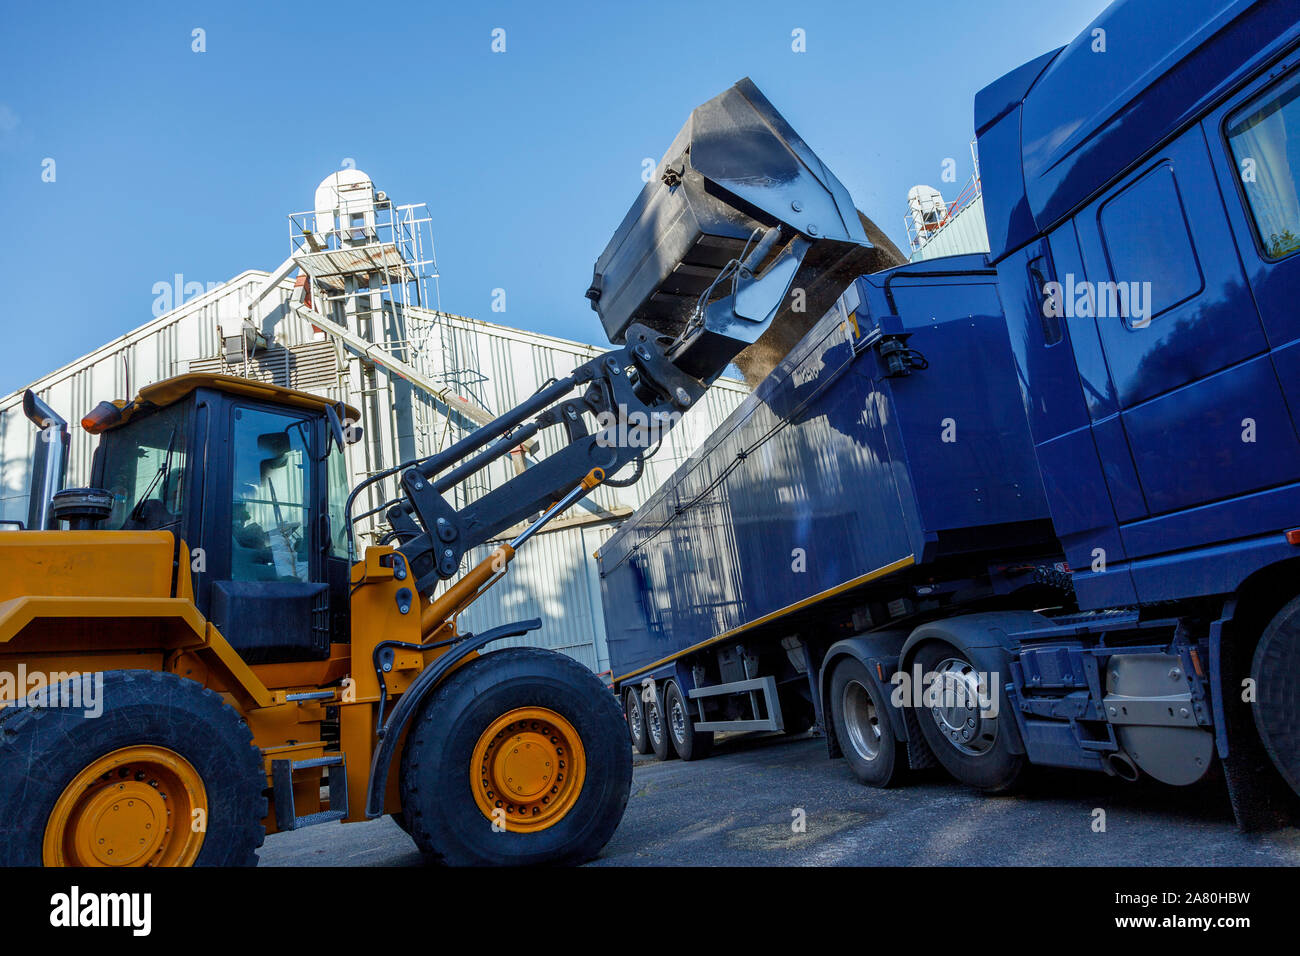 Tractor dumping quantities of grain into the back of a articulated lorry, against a blue sky. Stock Photo